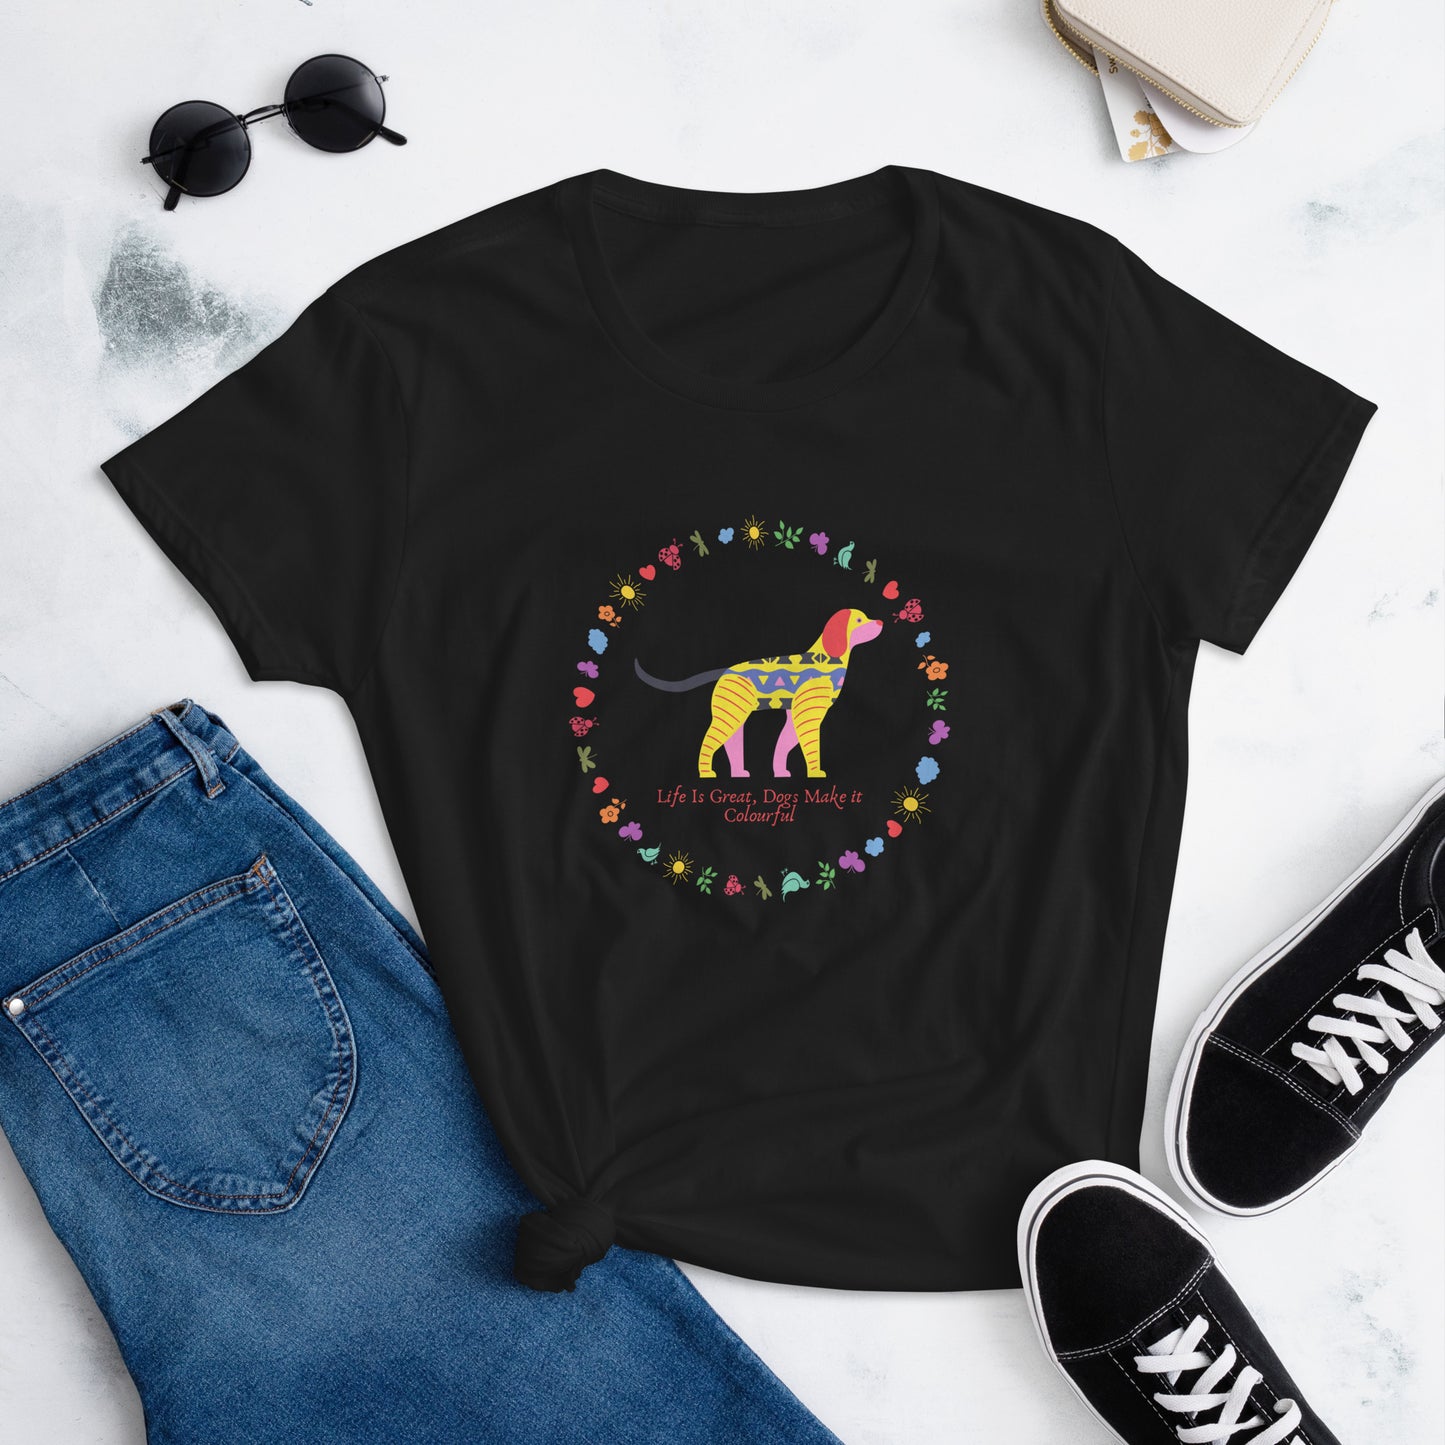 Life Is Colourful With Dogs Women's T-Shirt, Dog Mom Shirt